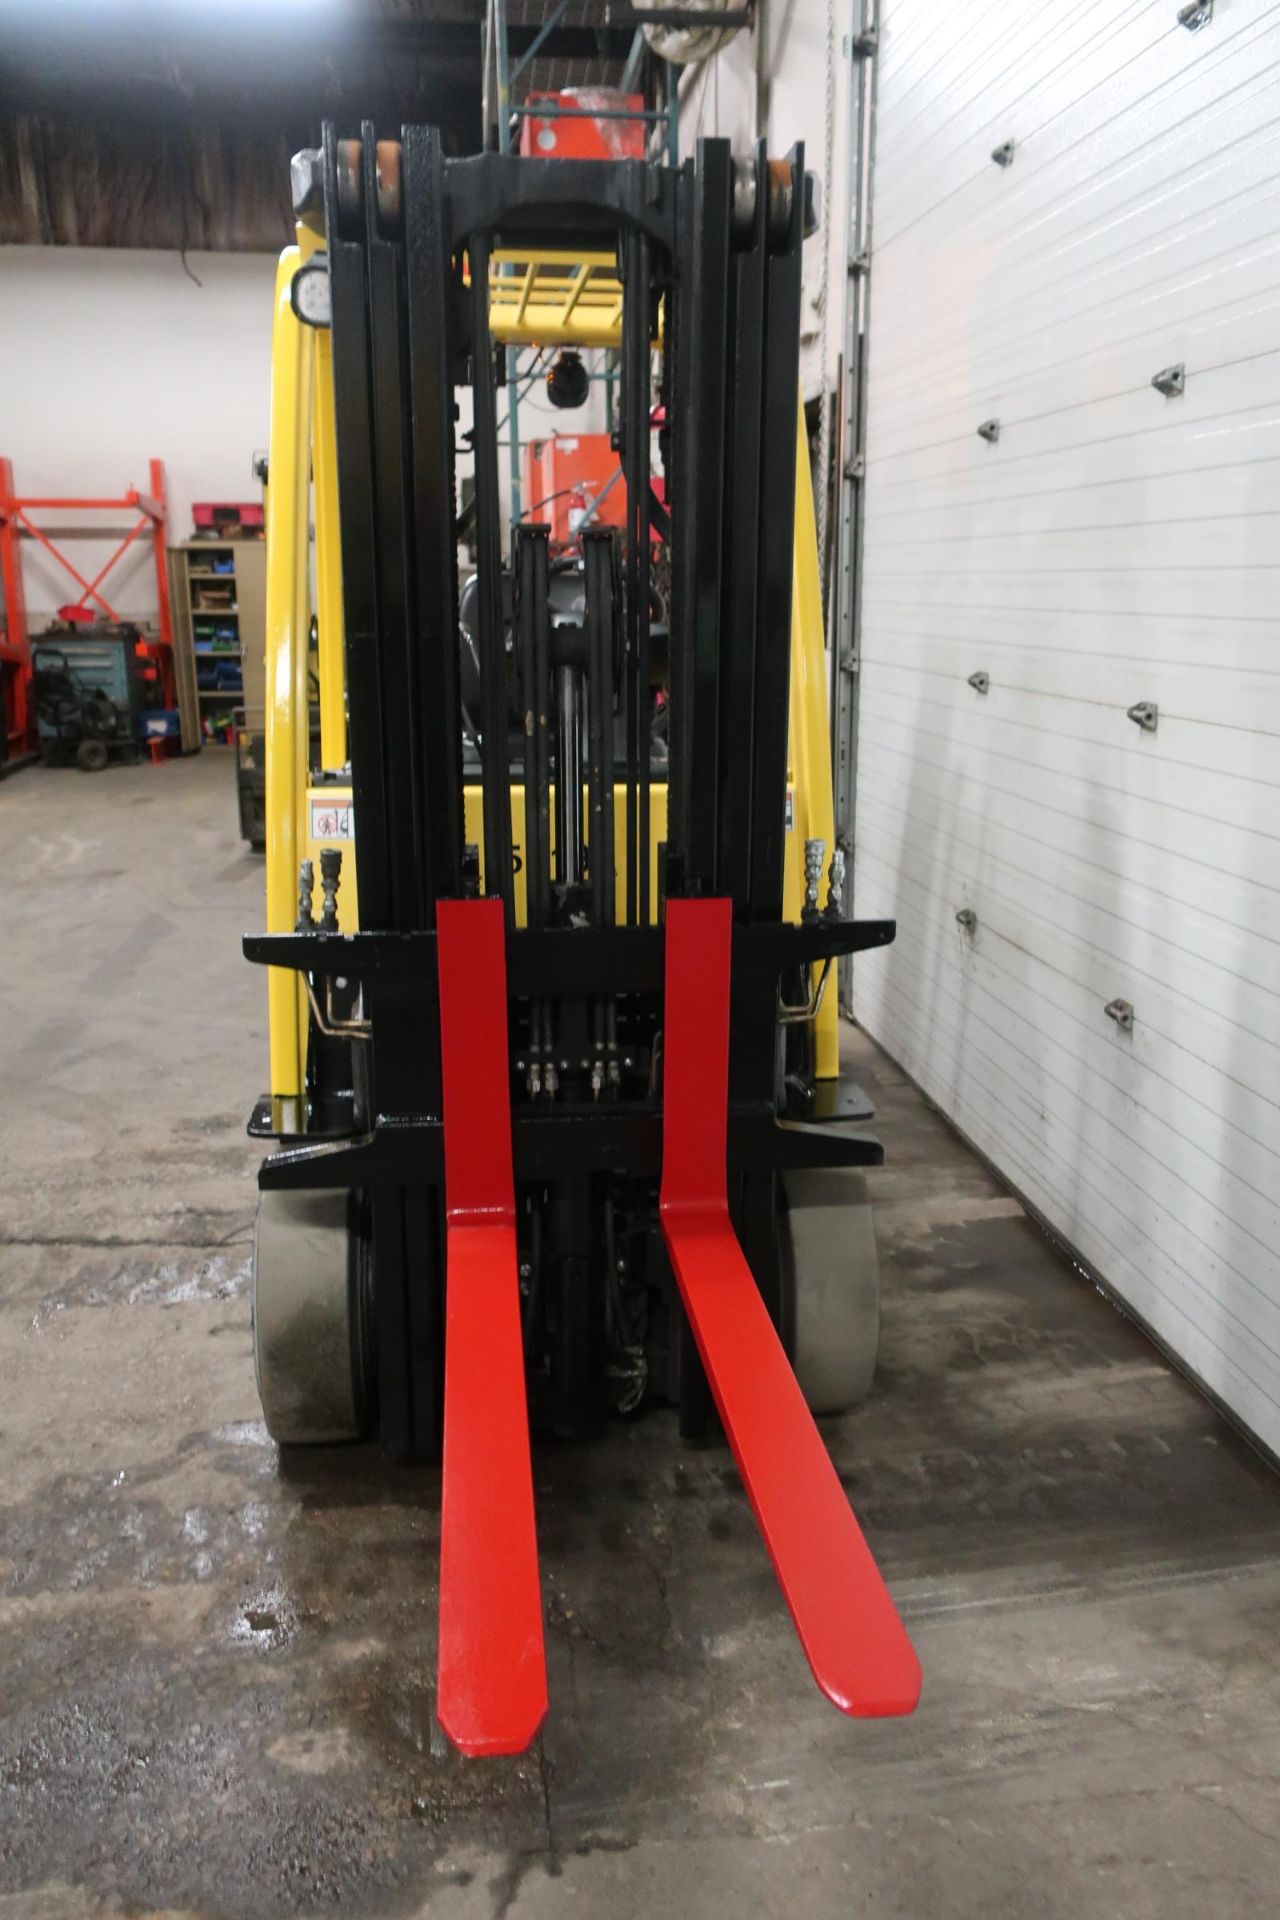 FREE CUSTOMS - 2013 Hyster 5000lbs Capacity Forklift with 3-stage mast - LPG (propane) (no propane - Image 2 of 2